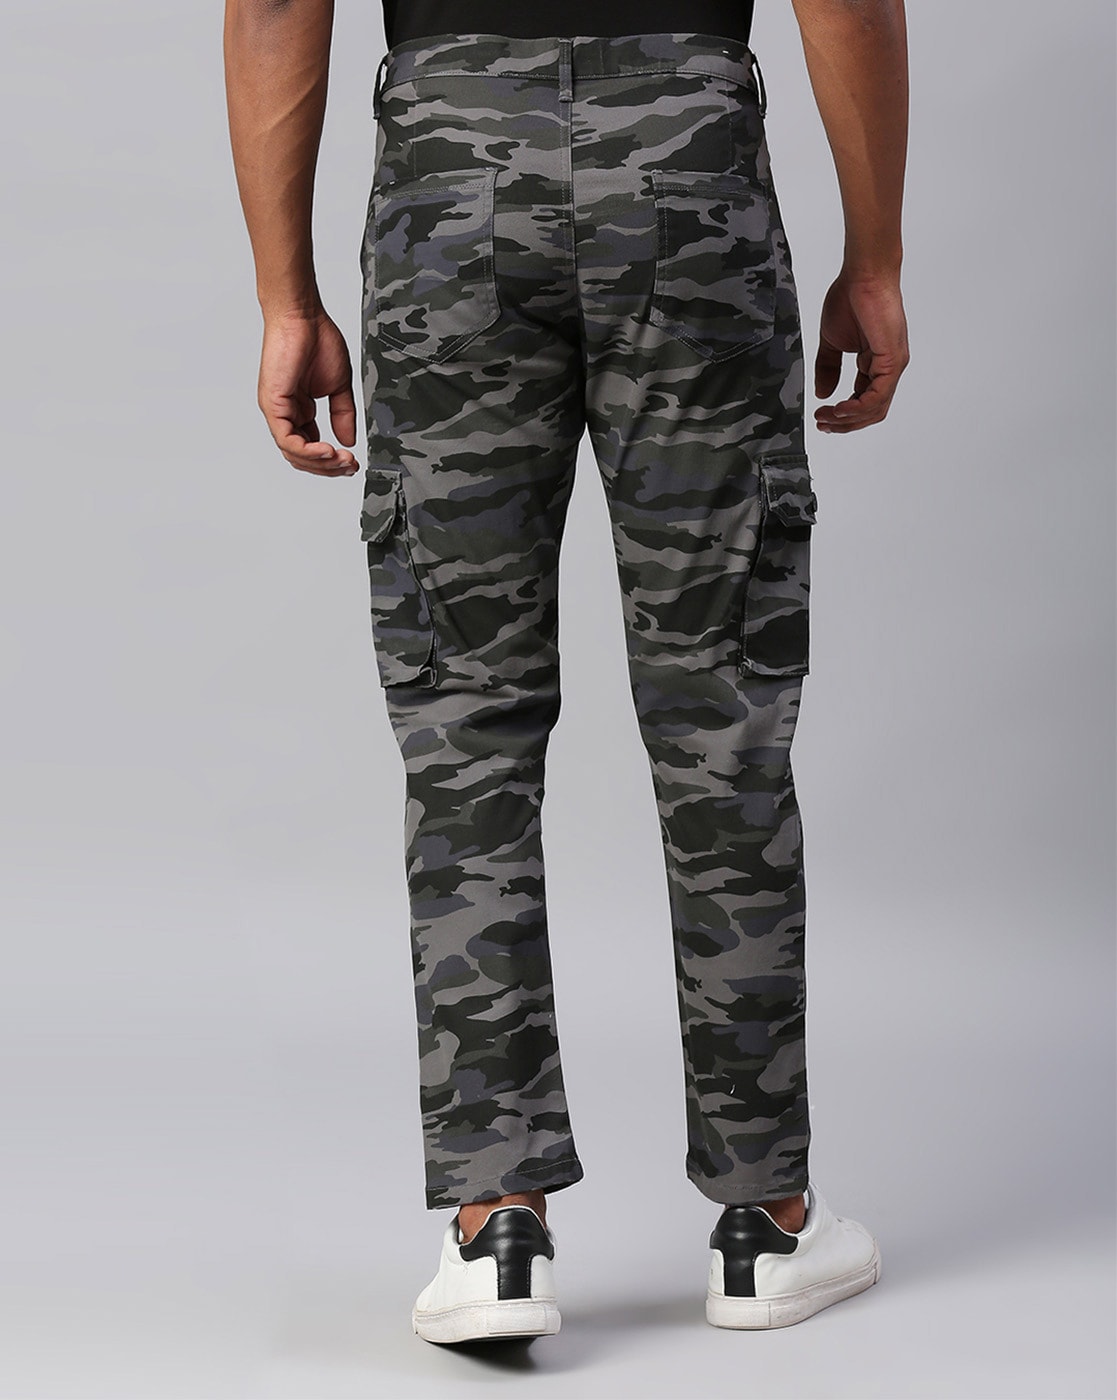 Victorious by ZIMEGO - Mens Twill Slim Fit Stretch Jogger Pants - CAMO –  ZIMEGO Apparel